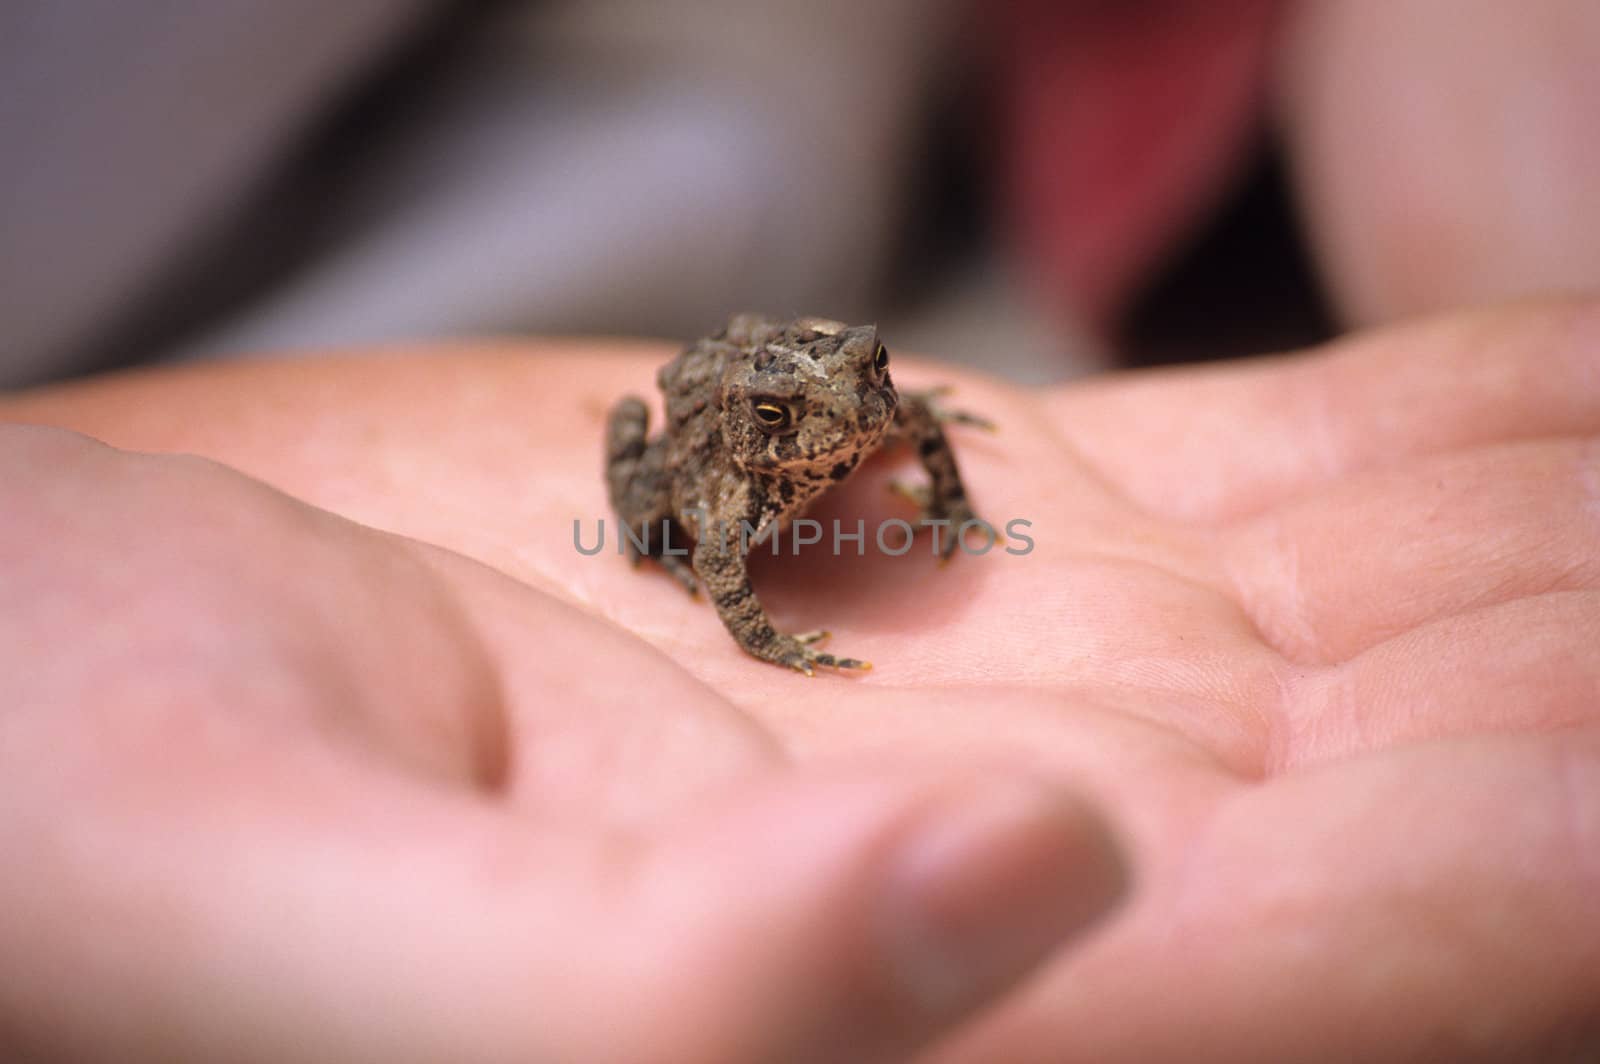 A tiny toad found in a garden sits in a man's hand